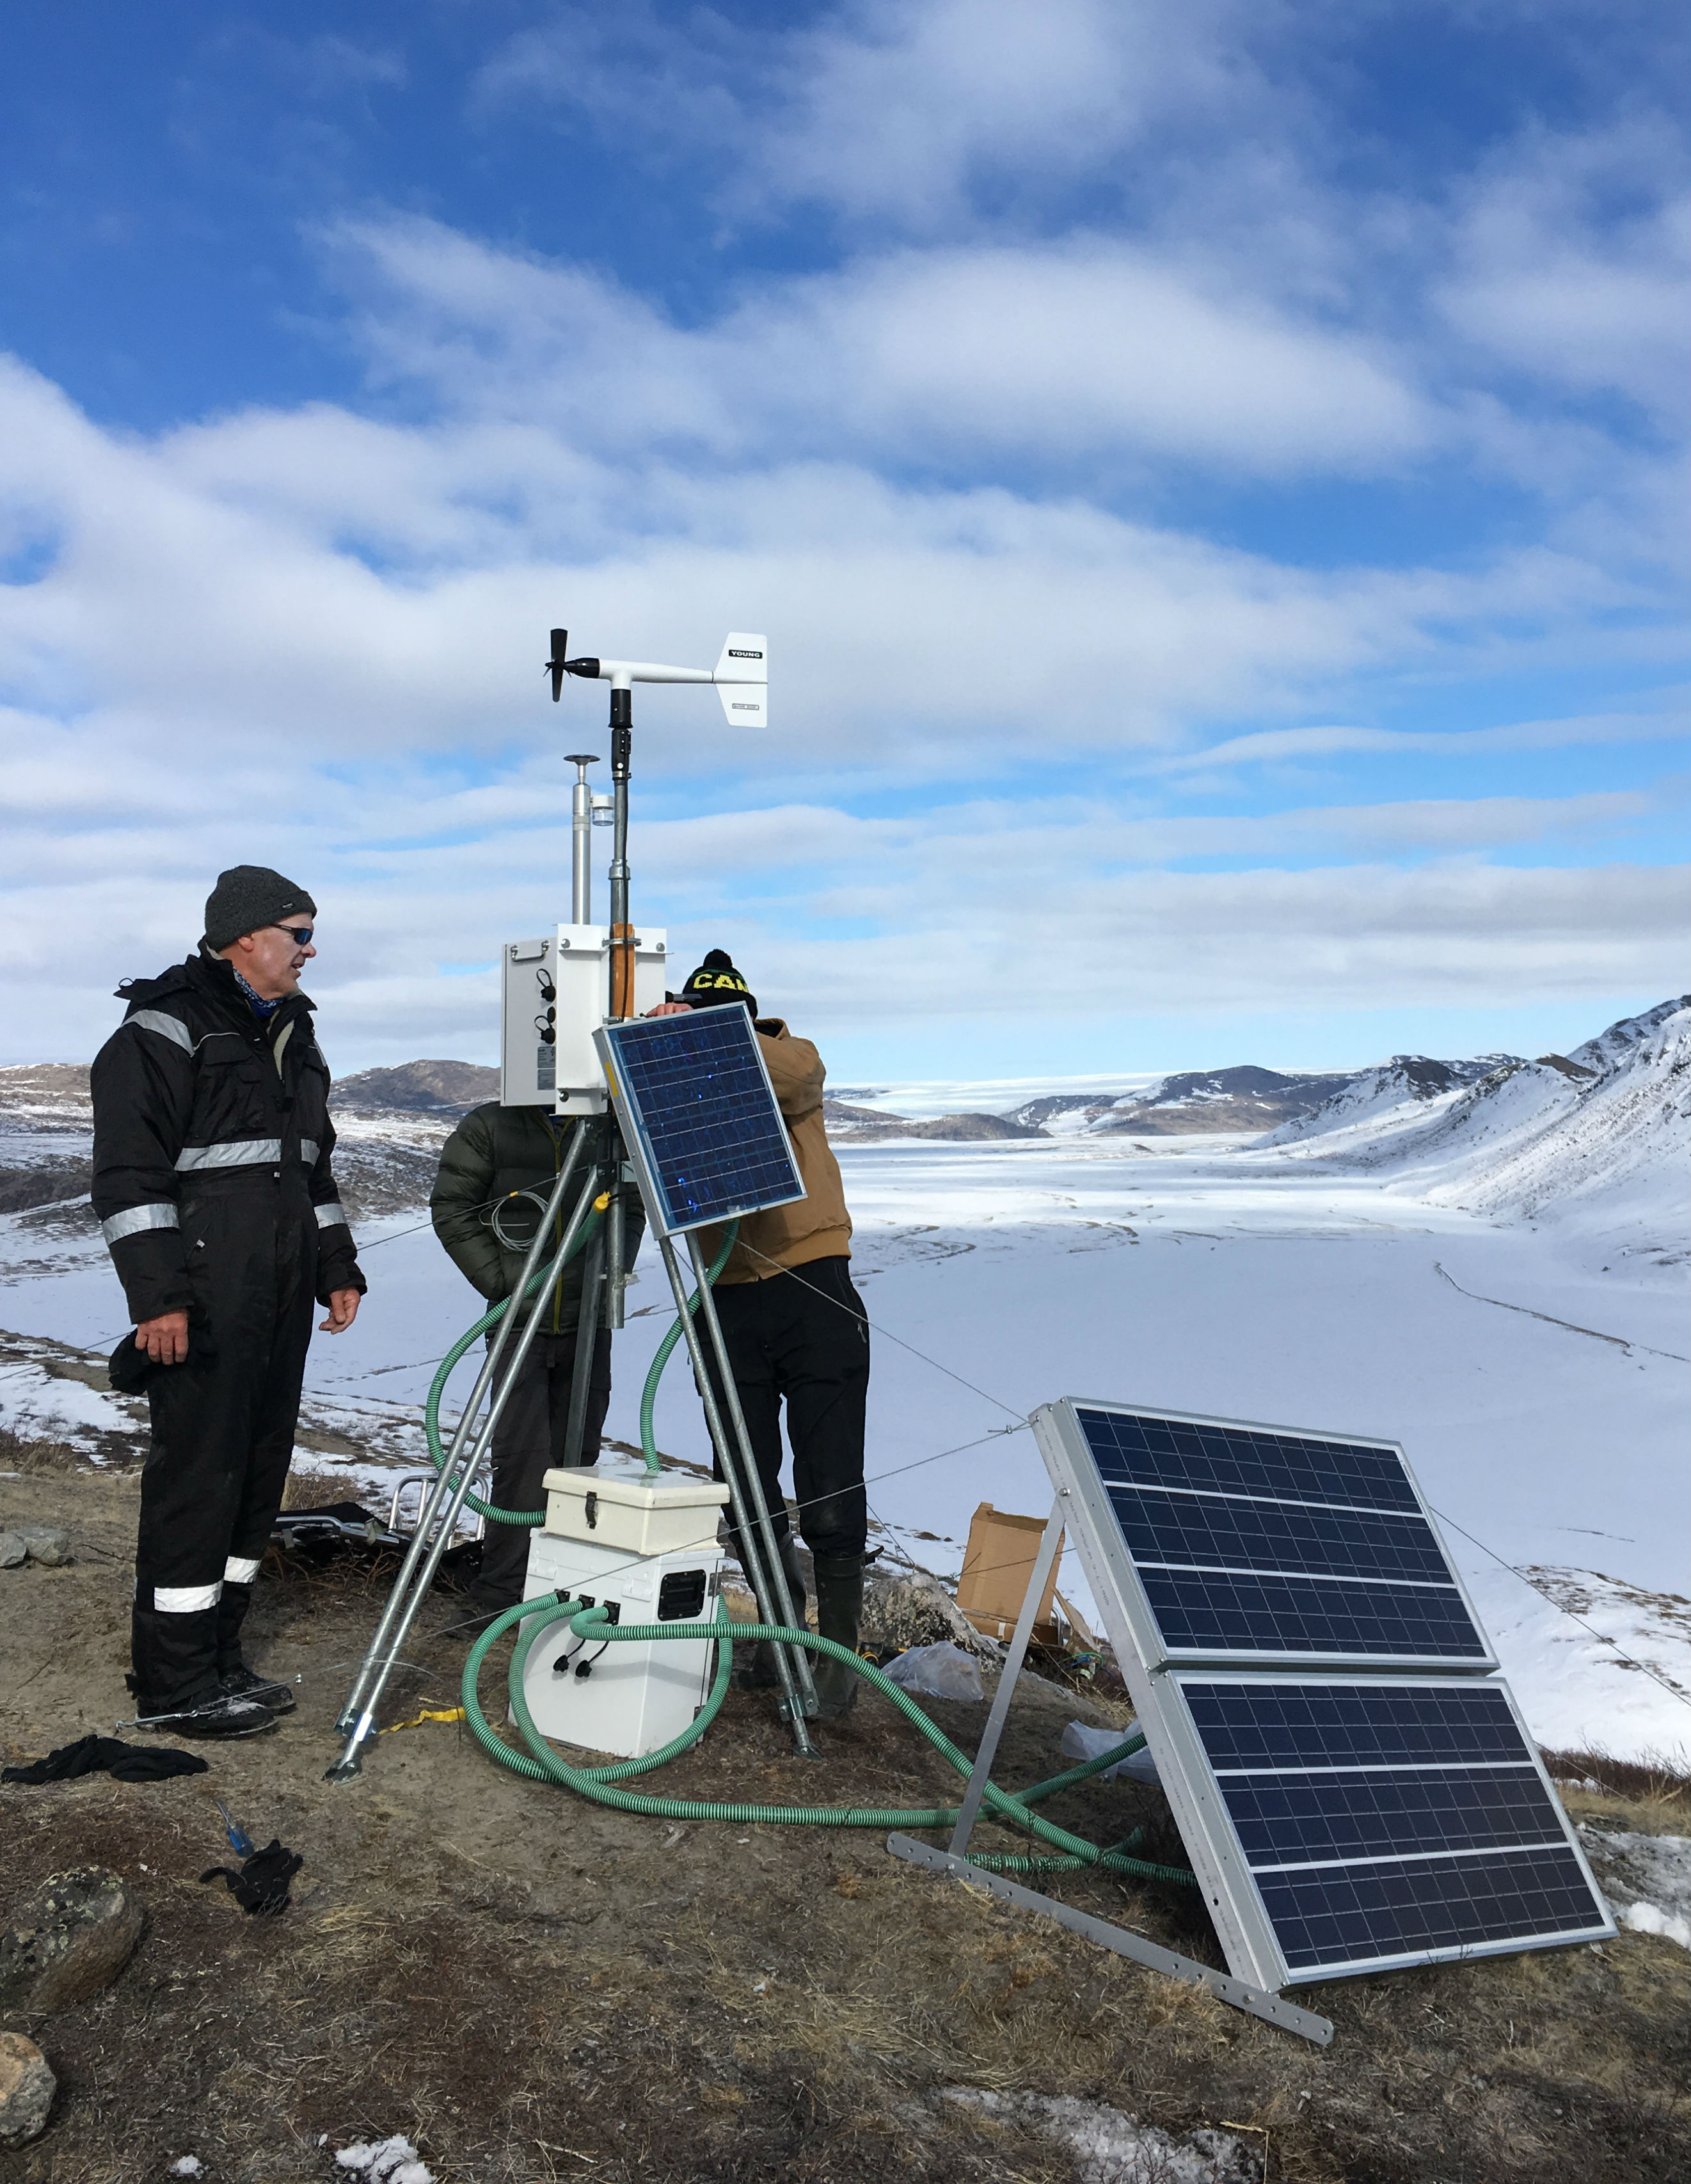 Loughborough geographers set up new equipment in Greenland in April